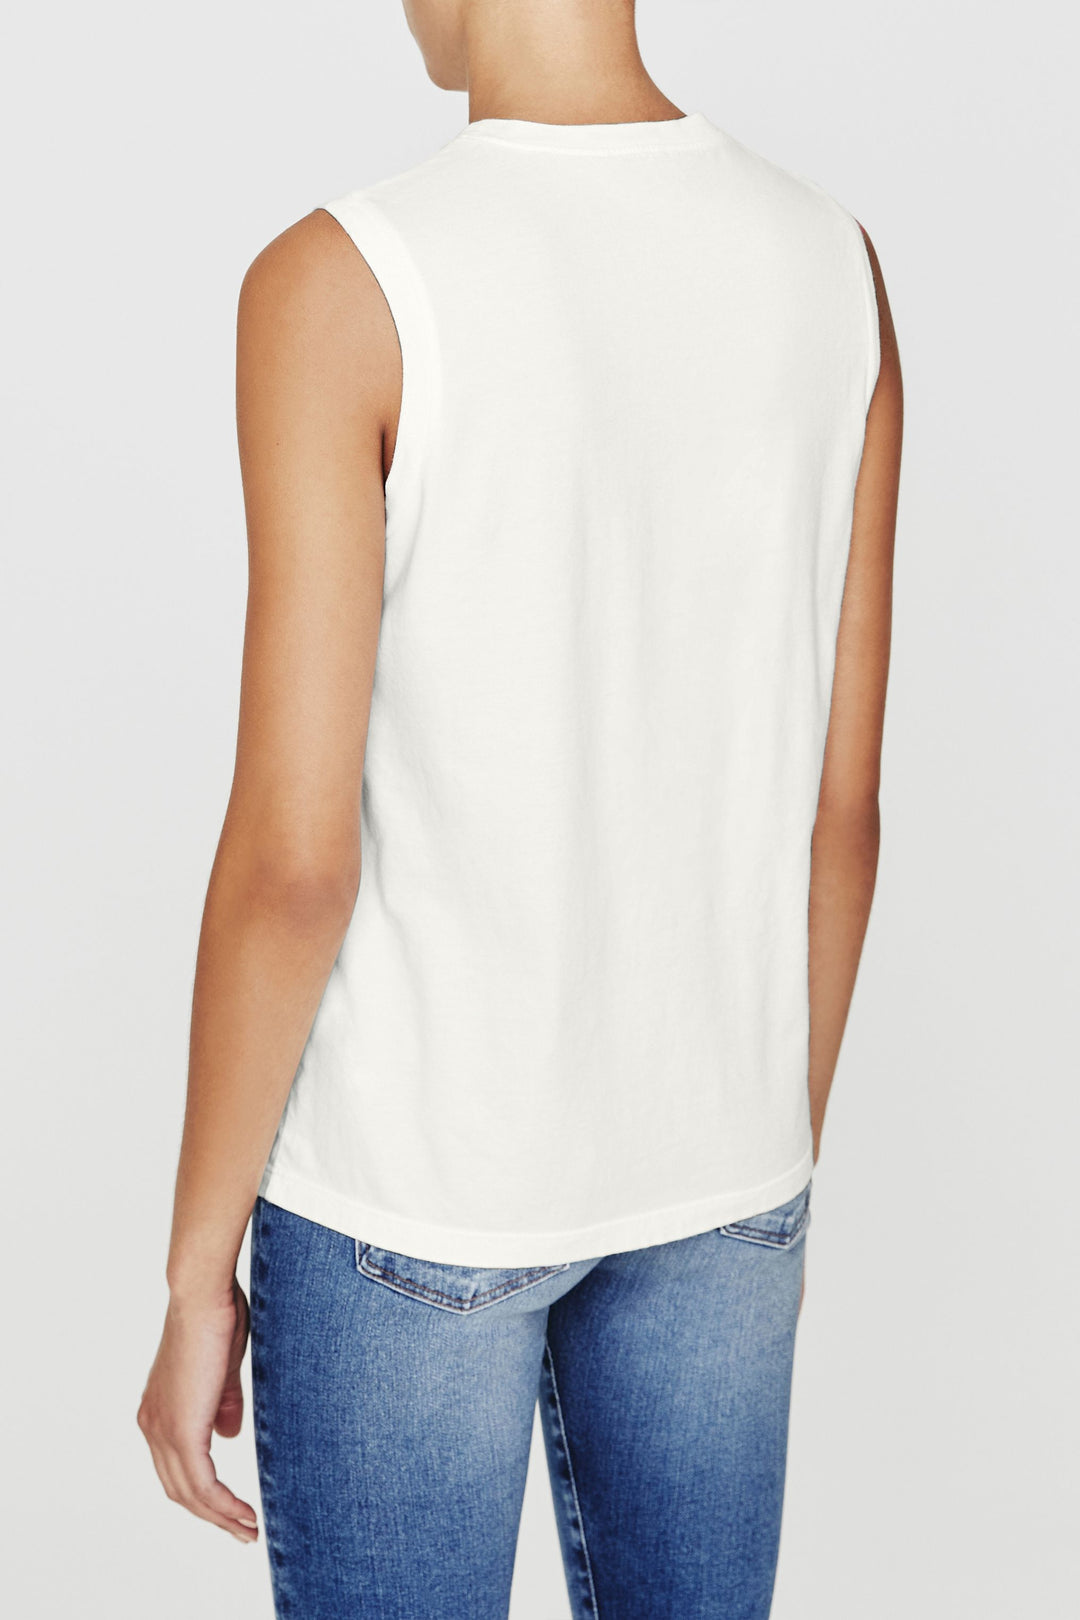 JAGGER MUSCLE TANK - Kingfisher Road - Online Boutique